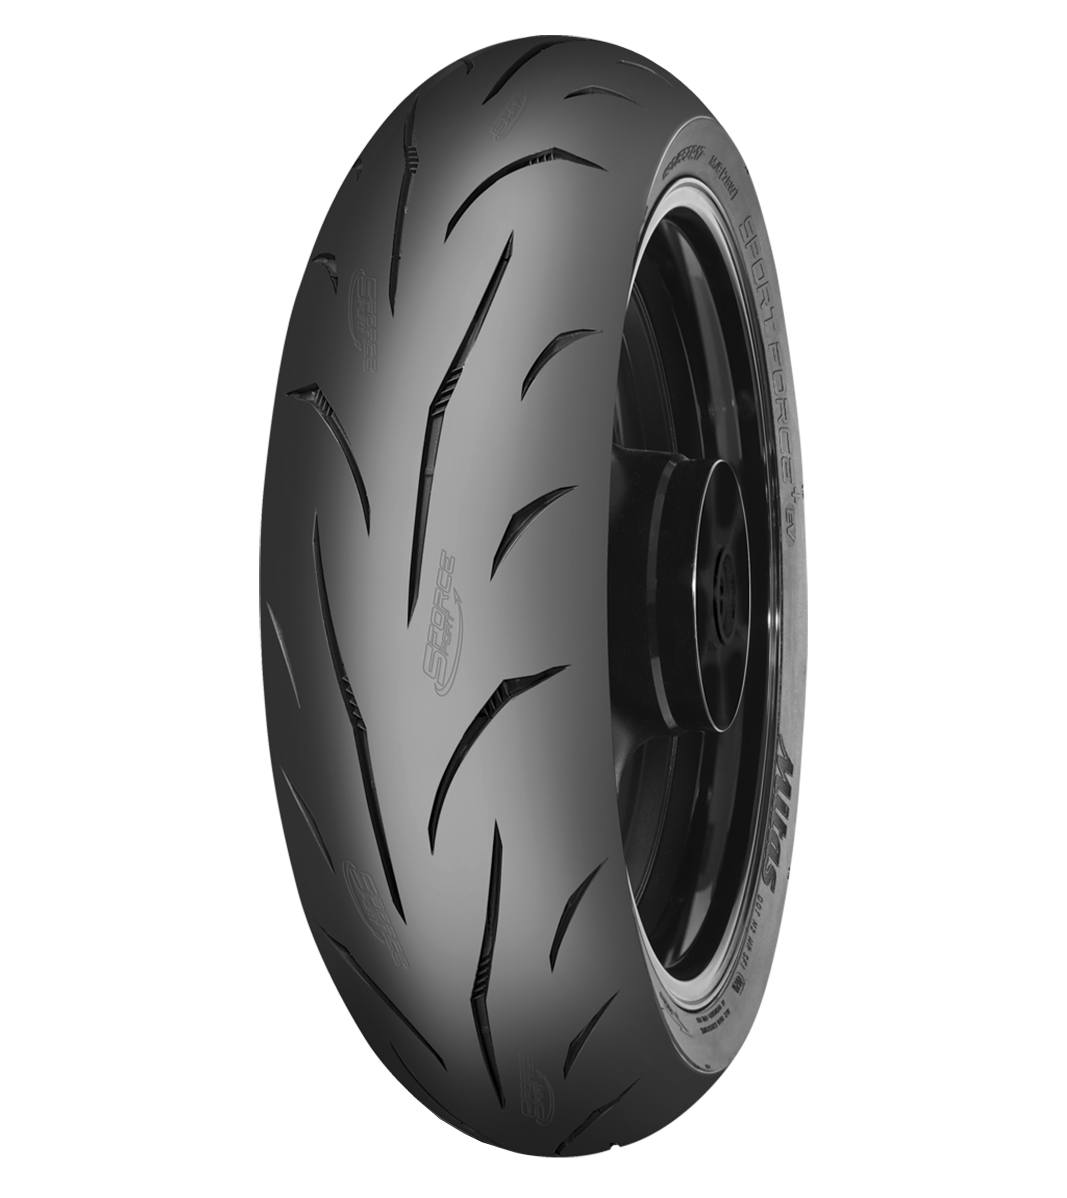 Mitas SPORT FORCE+ EV 190/50ZR17 Motorcycle Sport On-Road EVOLUTION (73W) No Stripe Tubeless Rear Tire, 603829, 190/50ZR17, Motorcycle Sport, On-Road, Rear, Sport, Sport Force+ EV, Sport Touring, Tires - Imported and distributed in North & South America by Lindeco Genuine Powersports - Premier Powersports Equipment and Accessories for Motorcycle Enthusiasts, Professional Riders and Dealers.